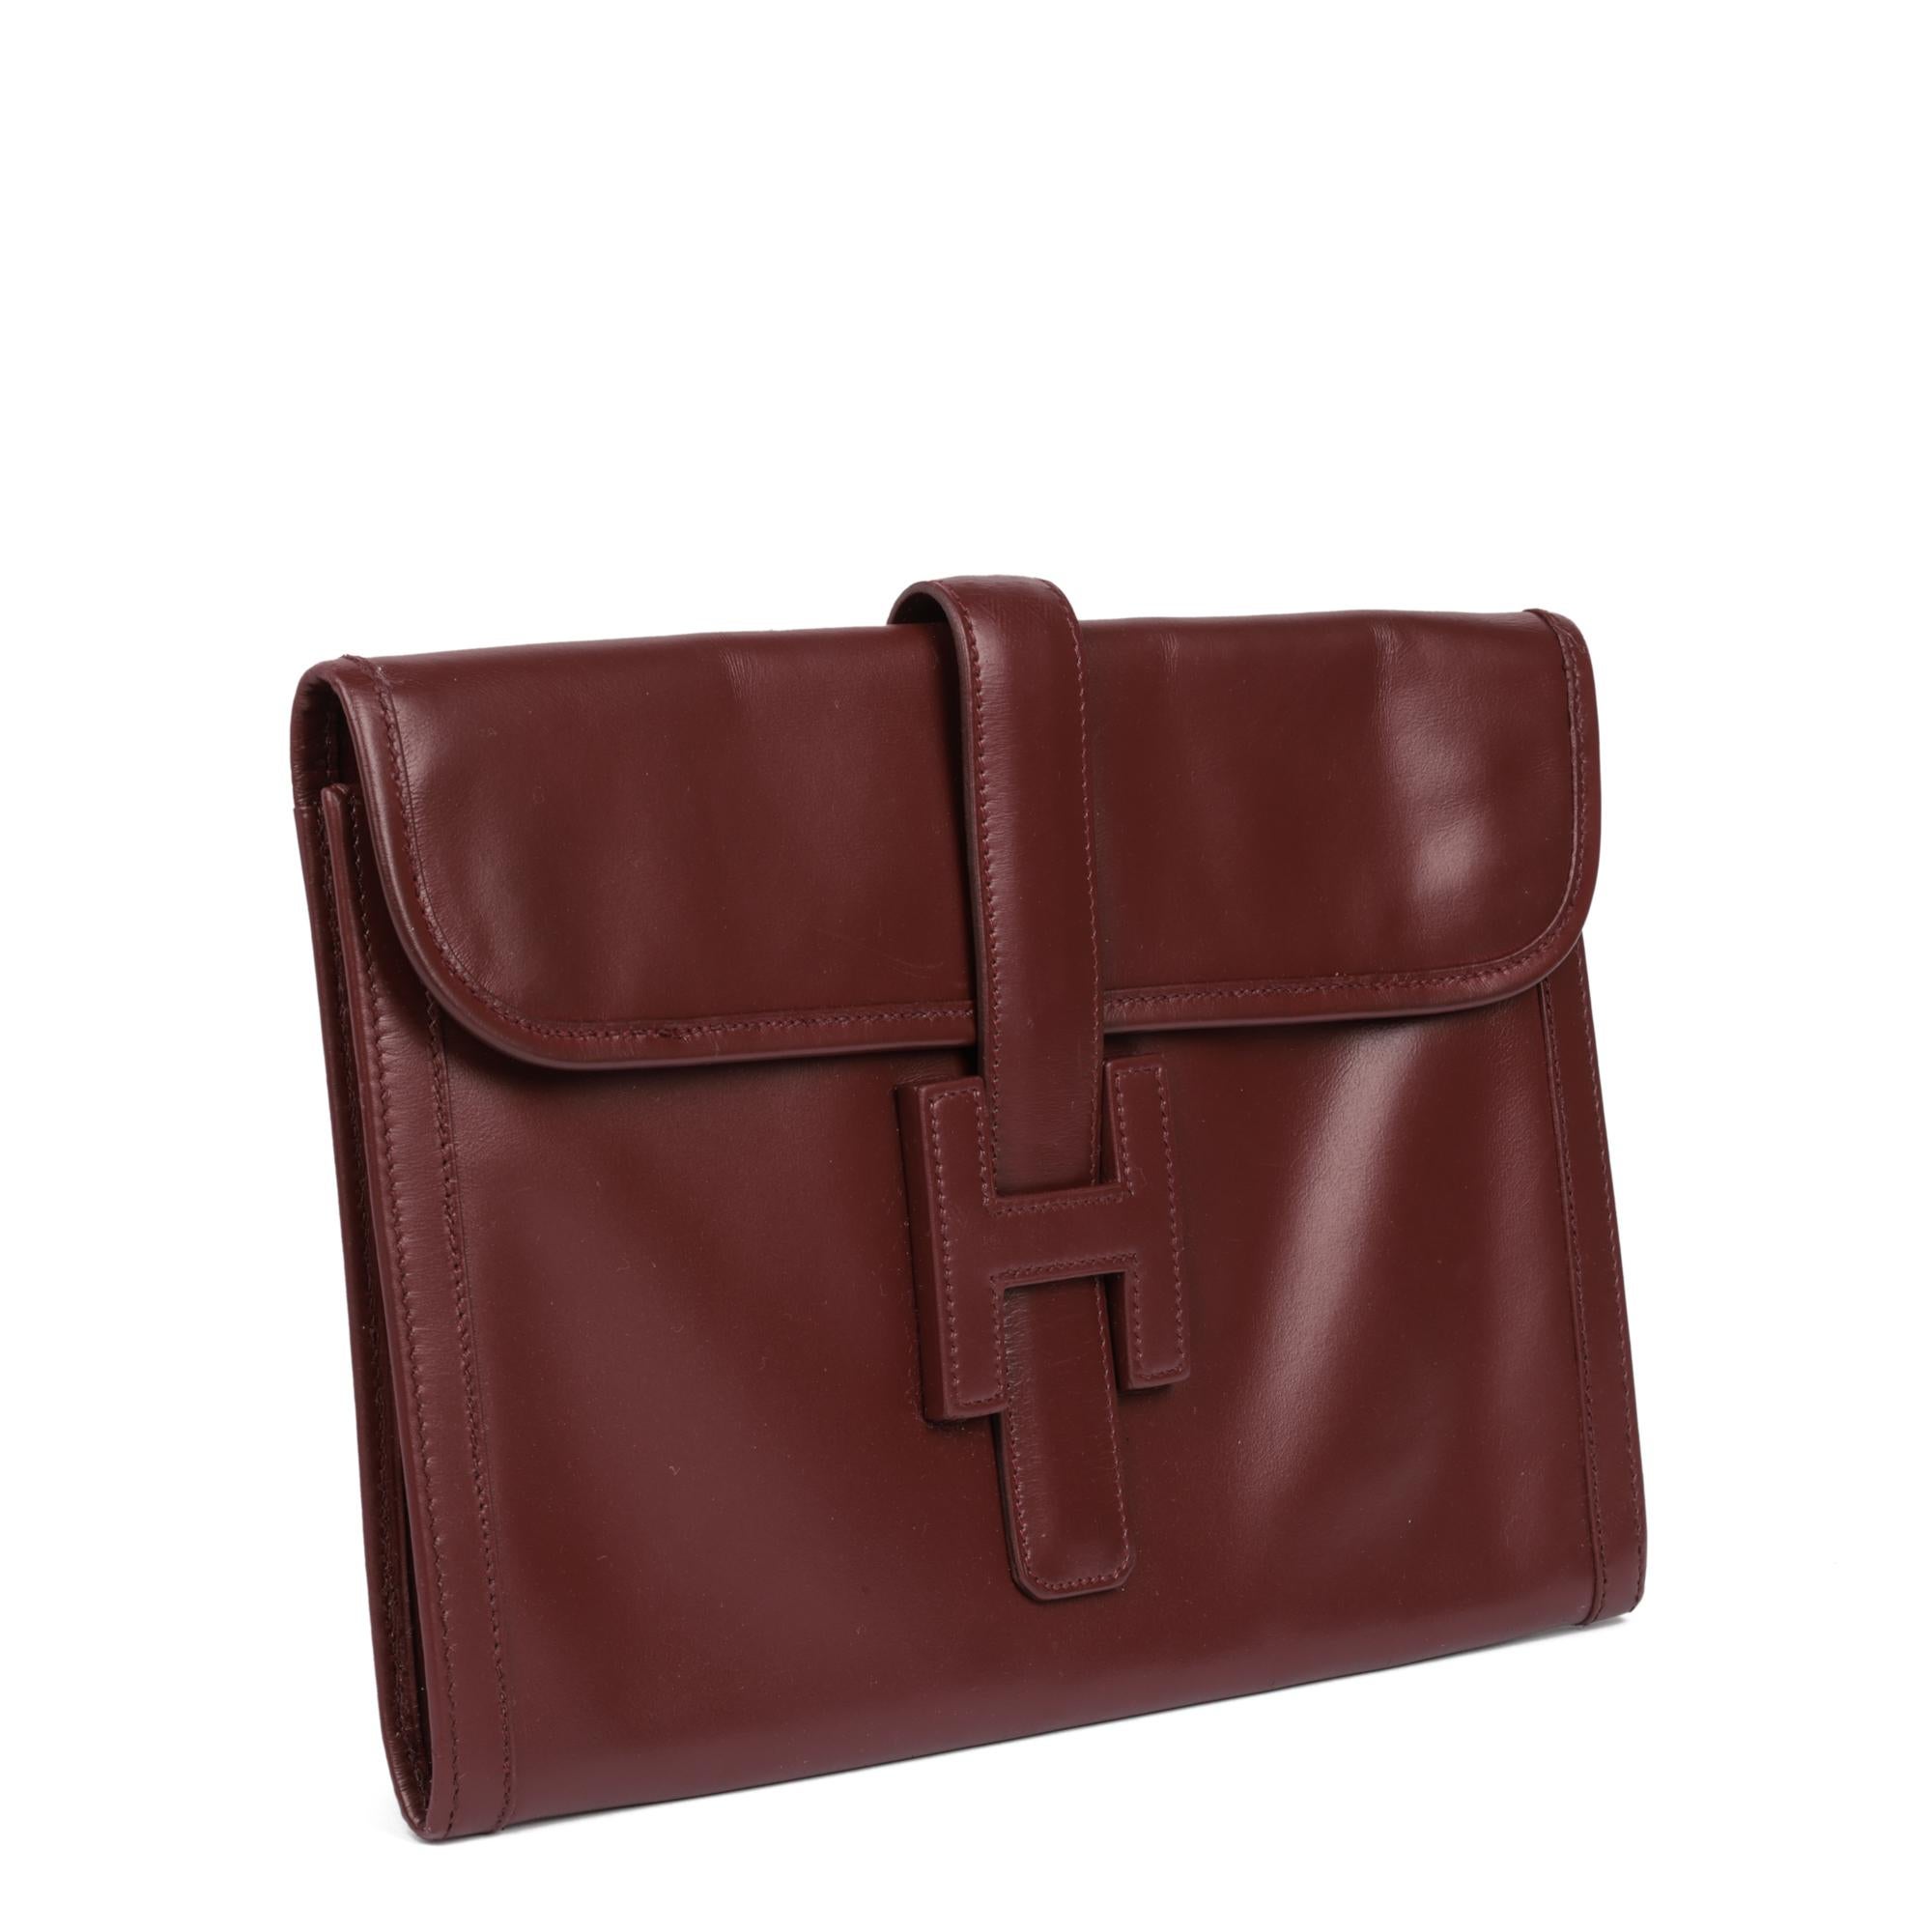 HERMÈS
Rouge H Box Calf Leather Vintage Jige 29

Xupes Reference: CB849
Serial Number: (F)
Age (Circa): 1976
Authenticity Details: Date Stamp (Made in France)
Gender: Ladies
Type: Clutch

Colour: Rouge H
Hardware: Gold
Material(s): Box Calf